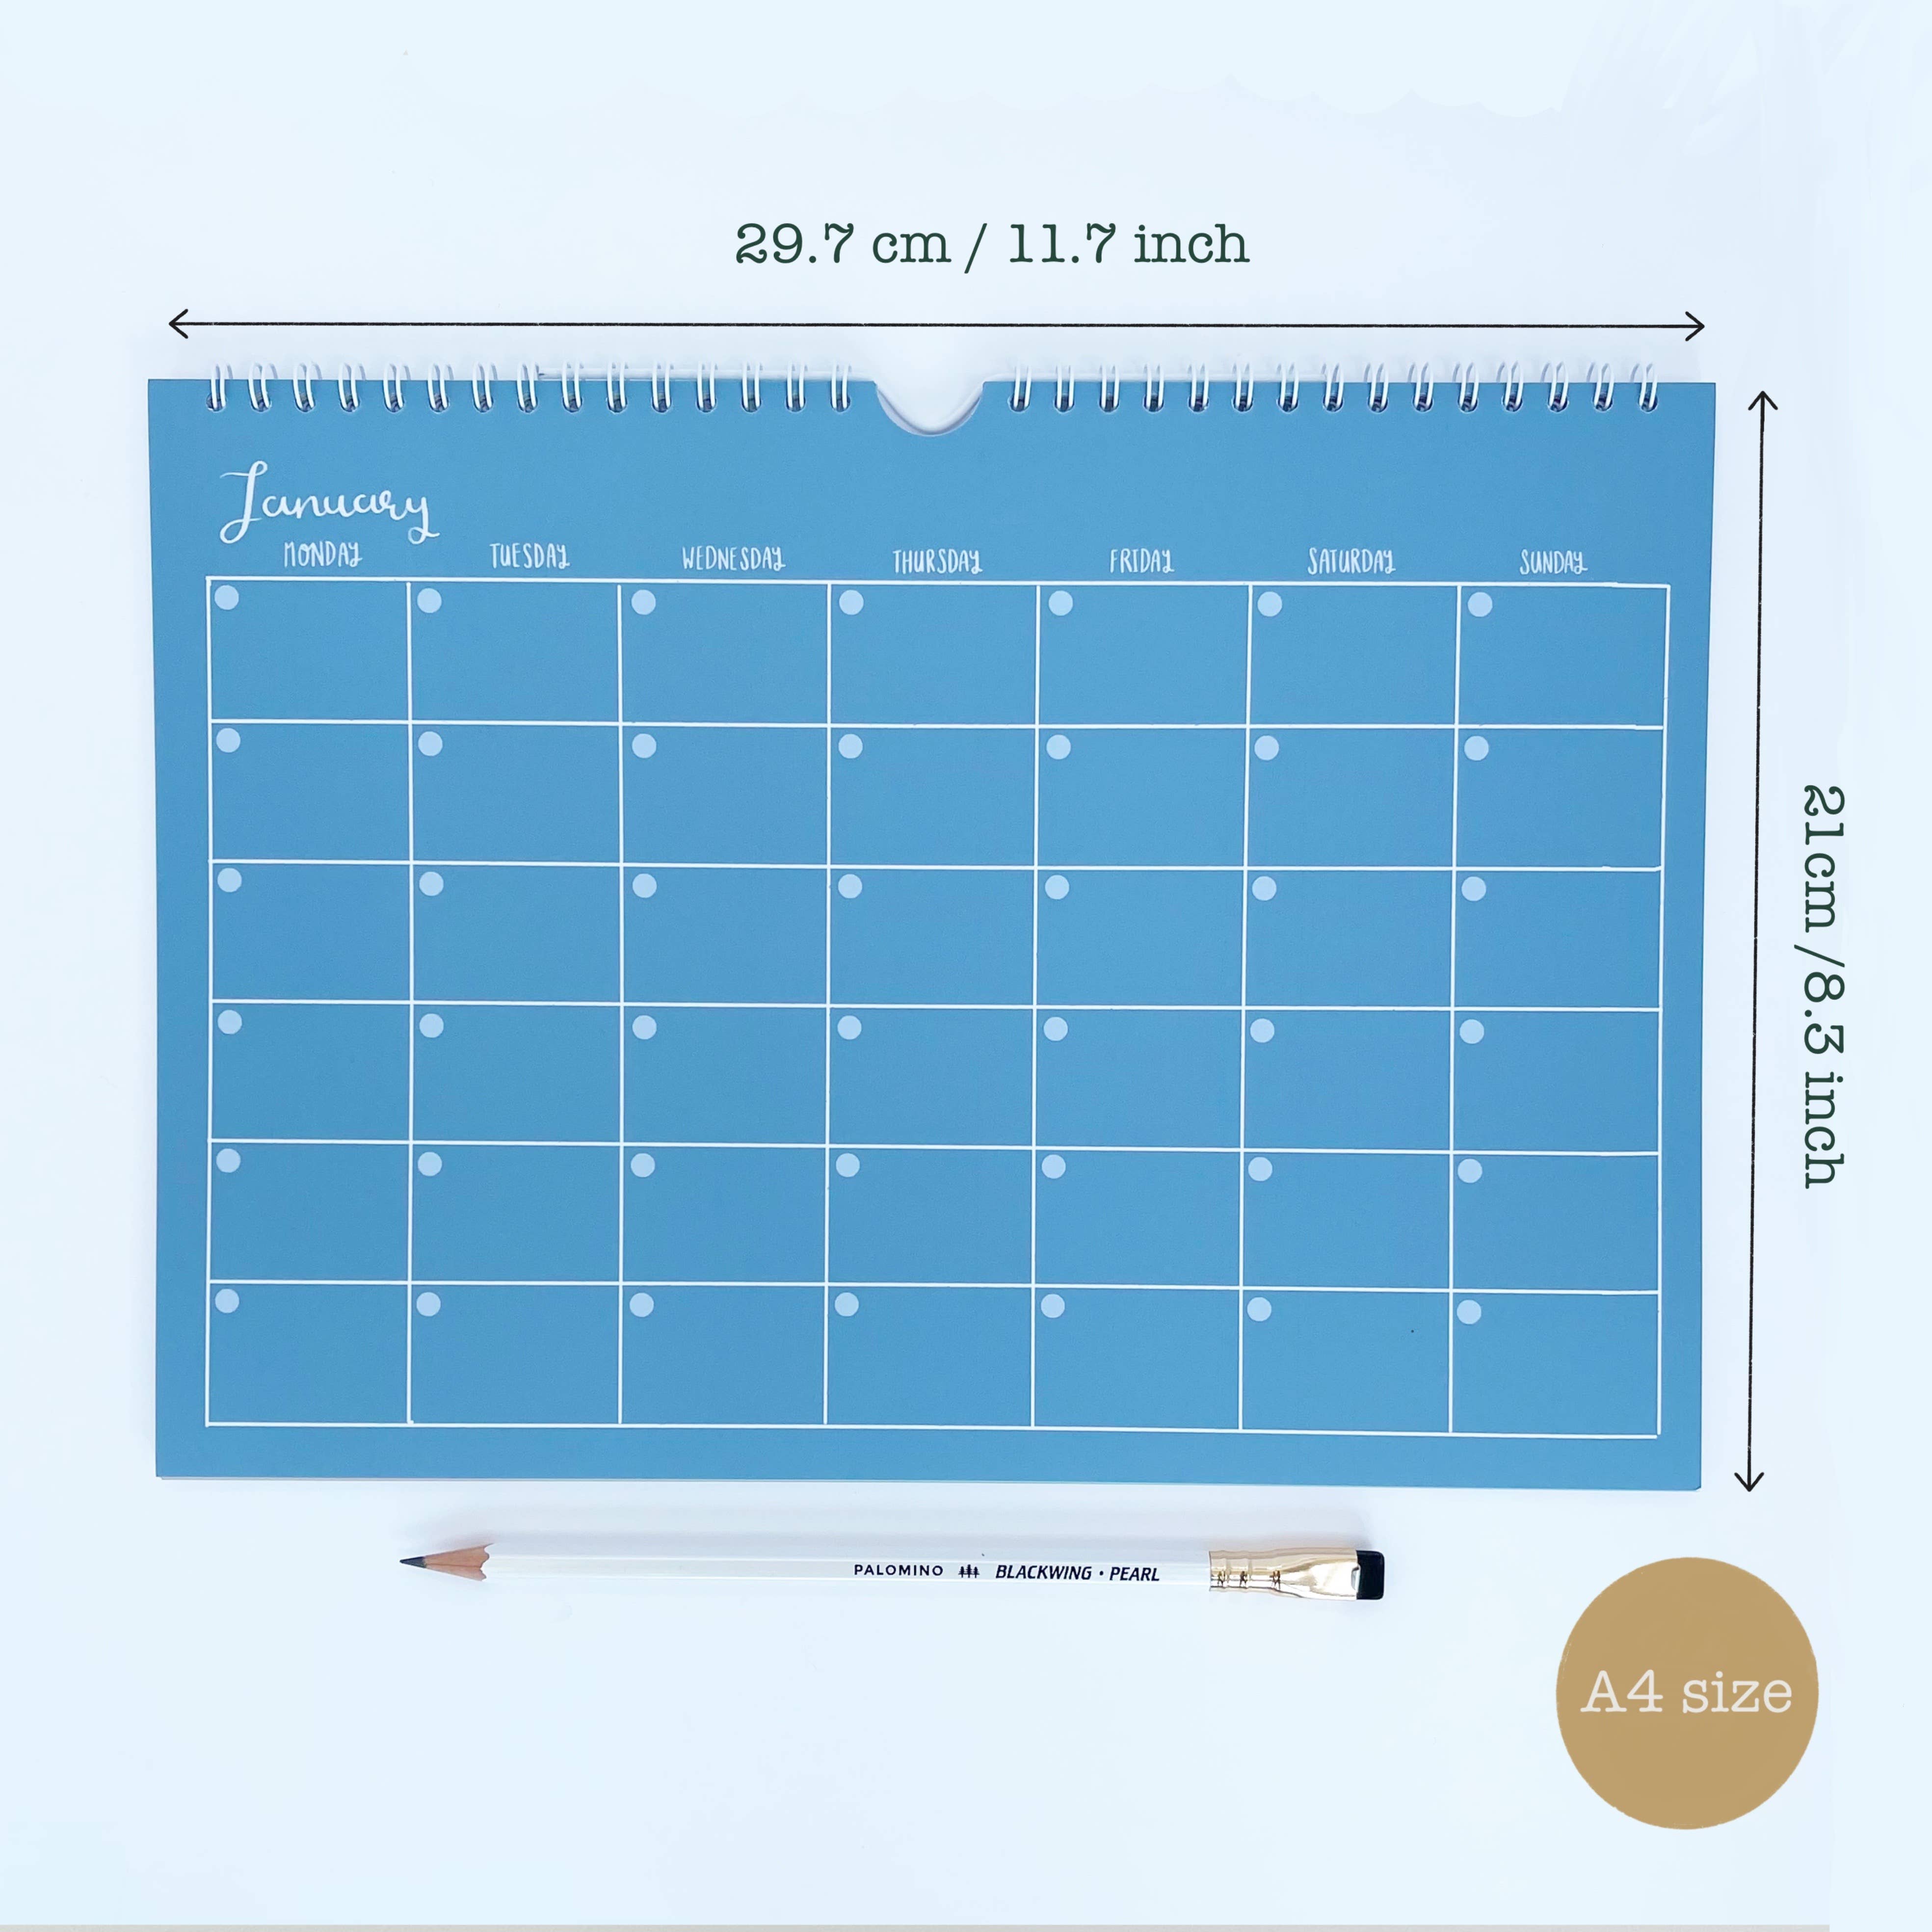 A4 Colours - Undated 12 Month Wall Calendar